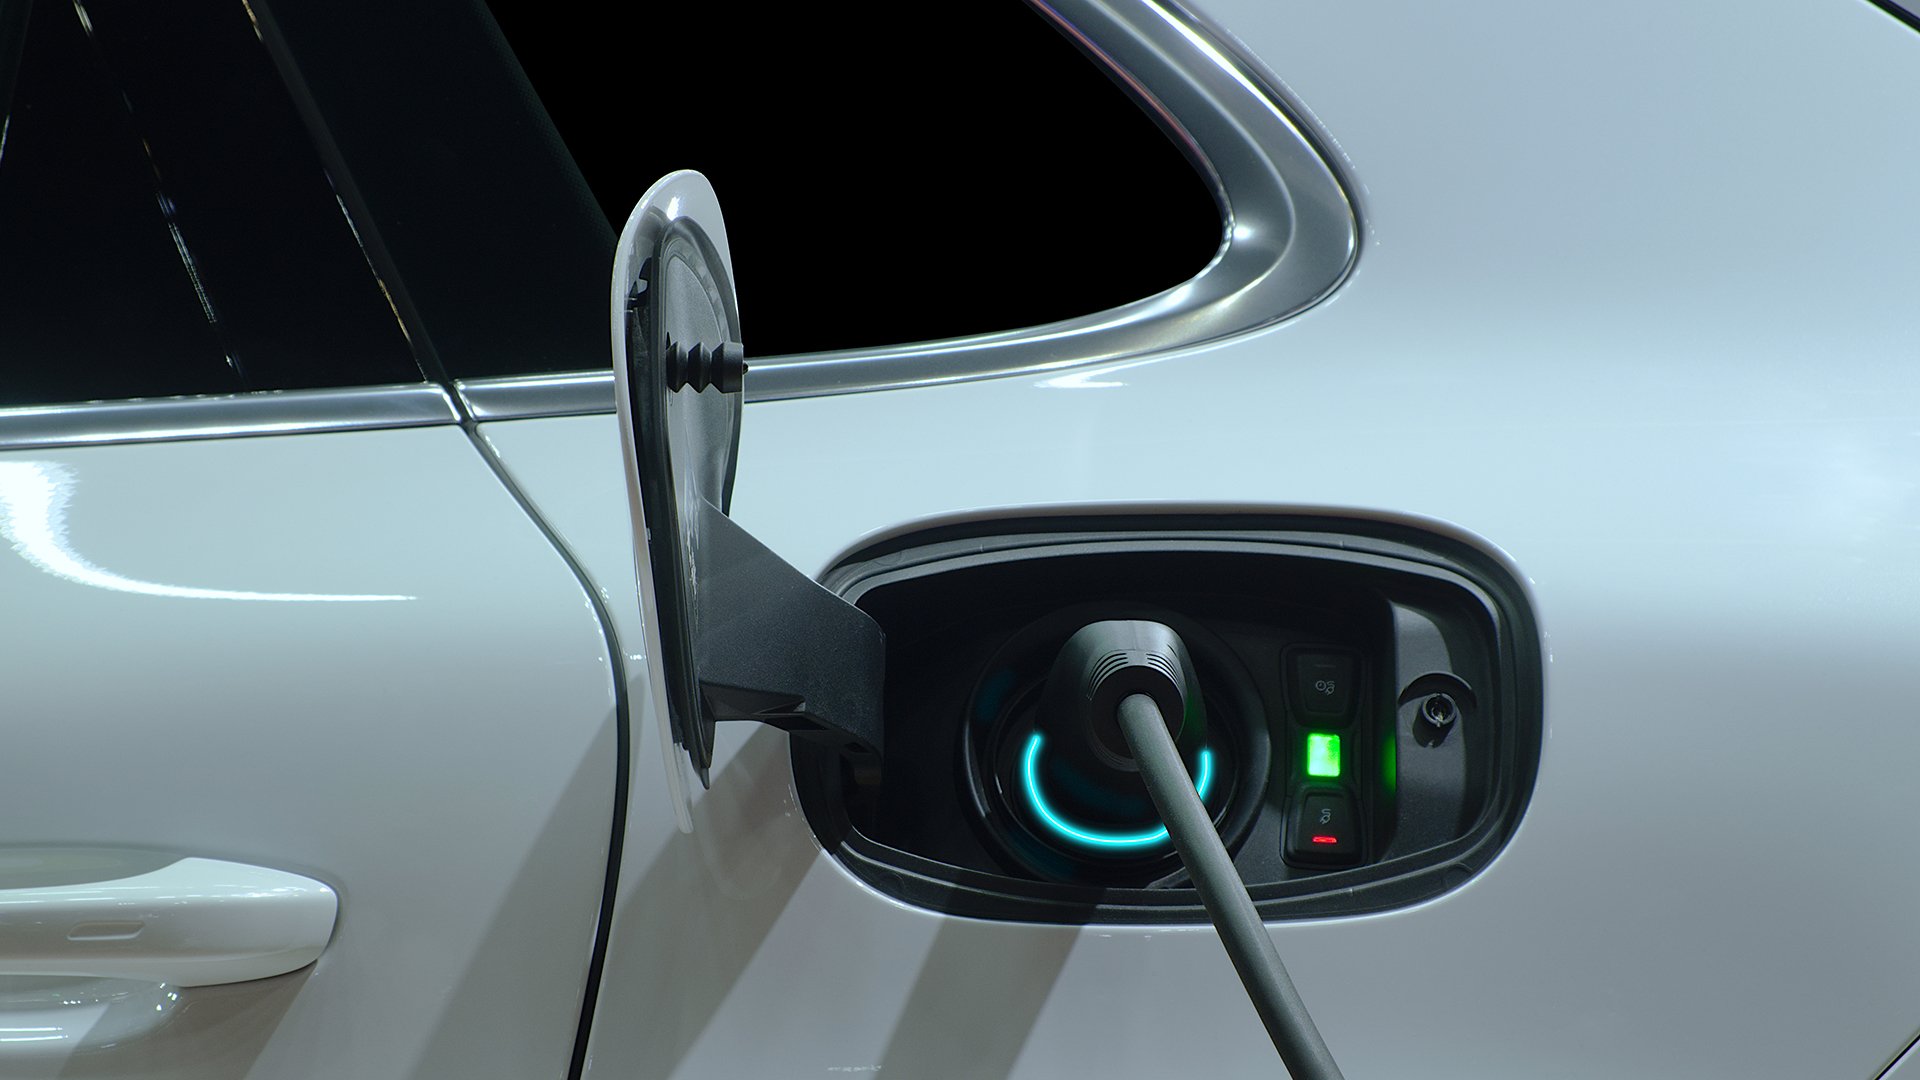 An electric vehicle charging via a charging cable that is equipped with modern lighting.